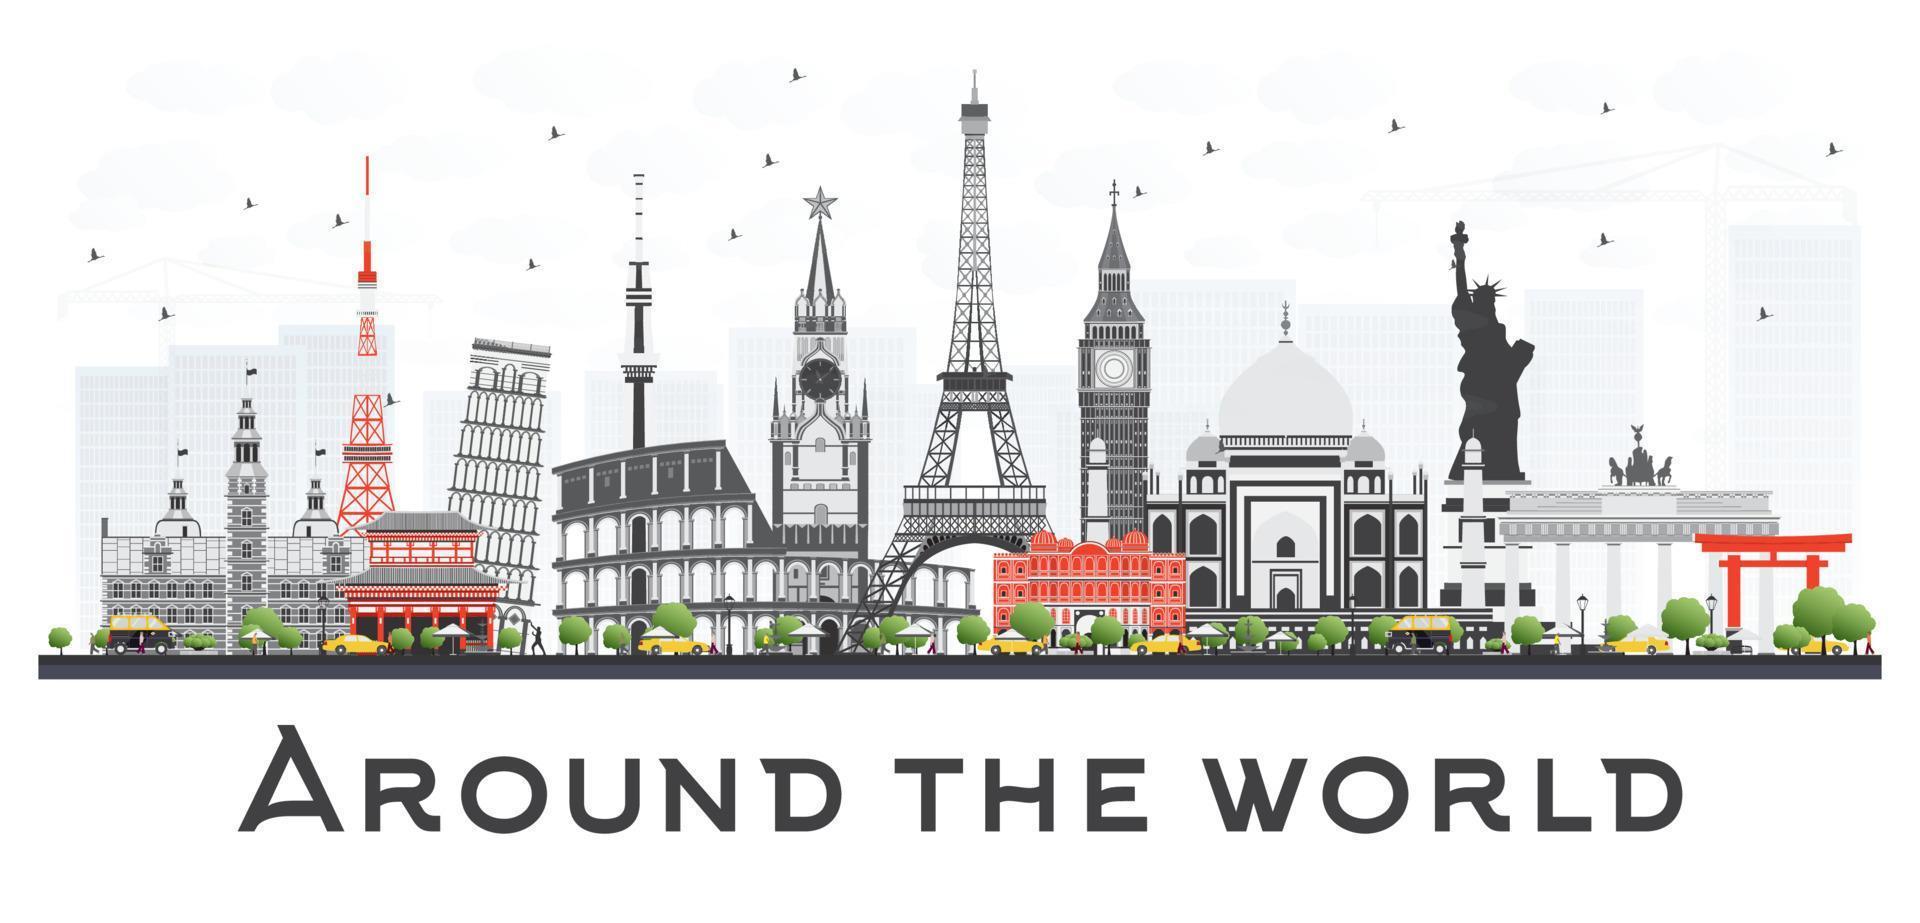 Travel Concept Around the World with Famous International Landmarks. vector